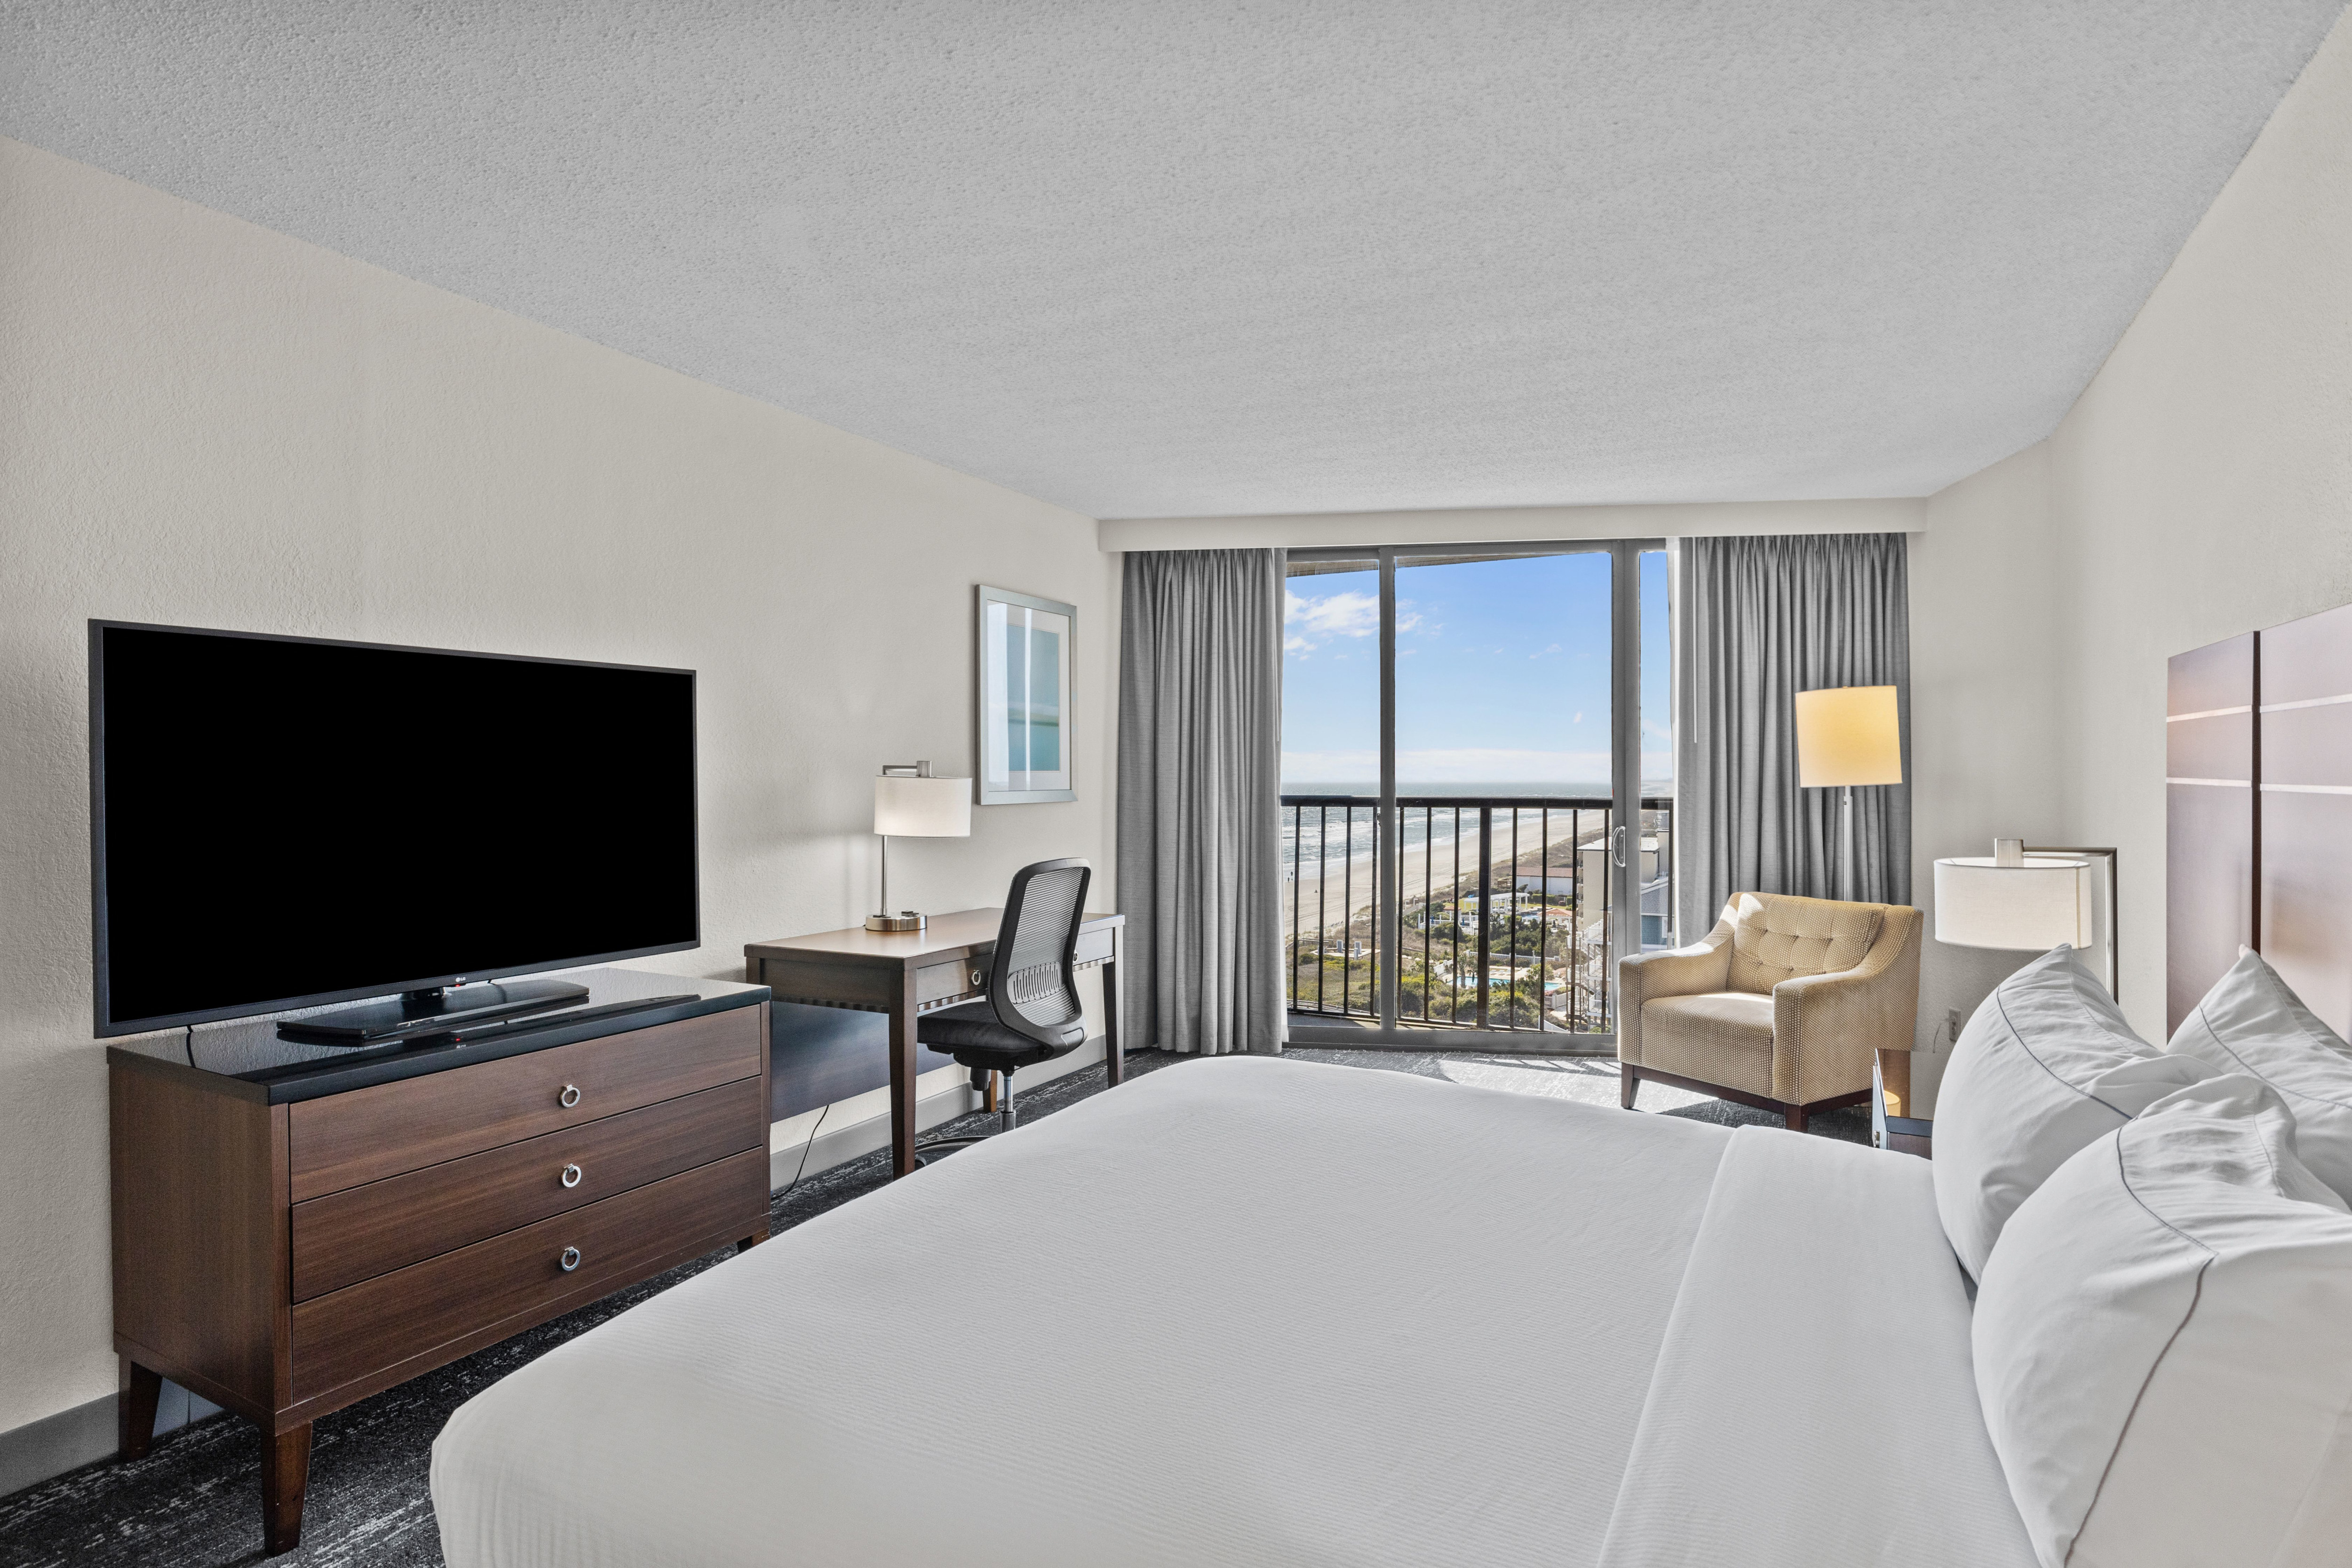 King Guest Room with Desk HDTV and Balcony with Ocean View